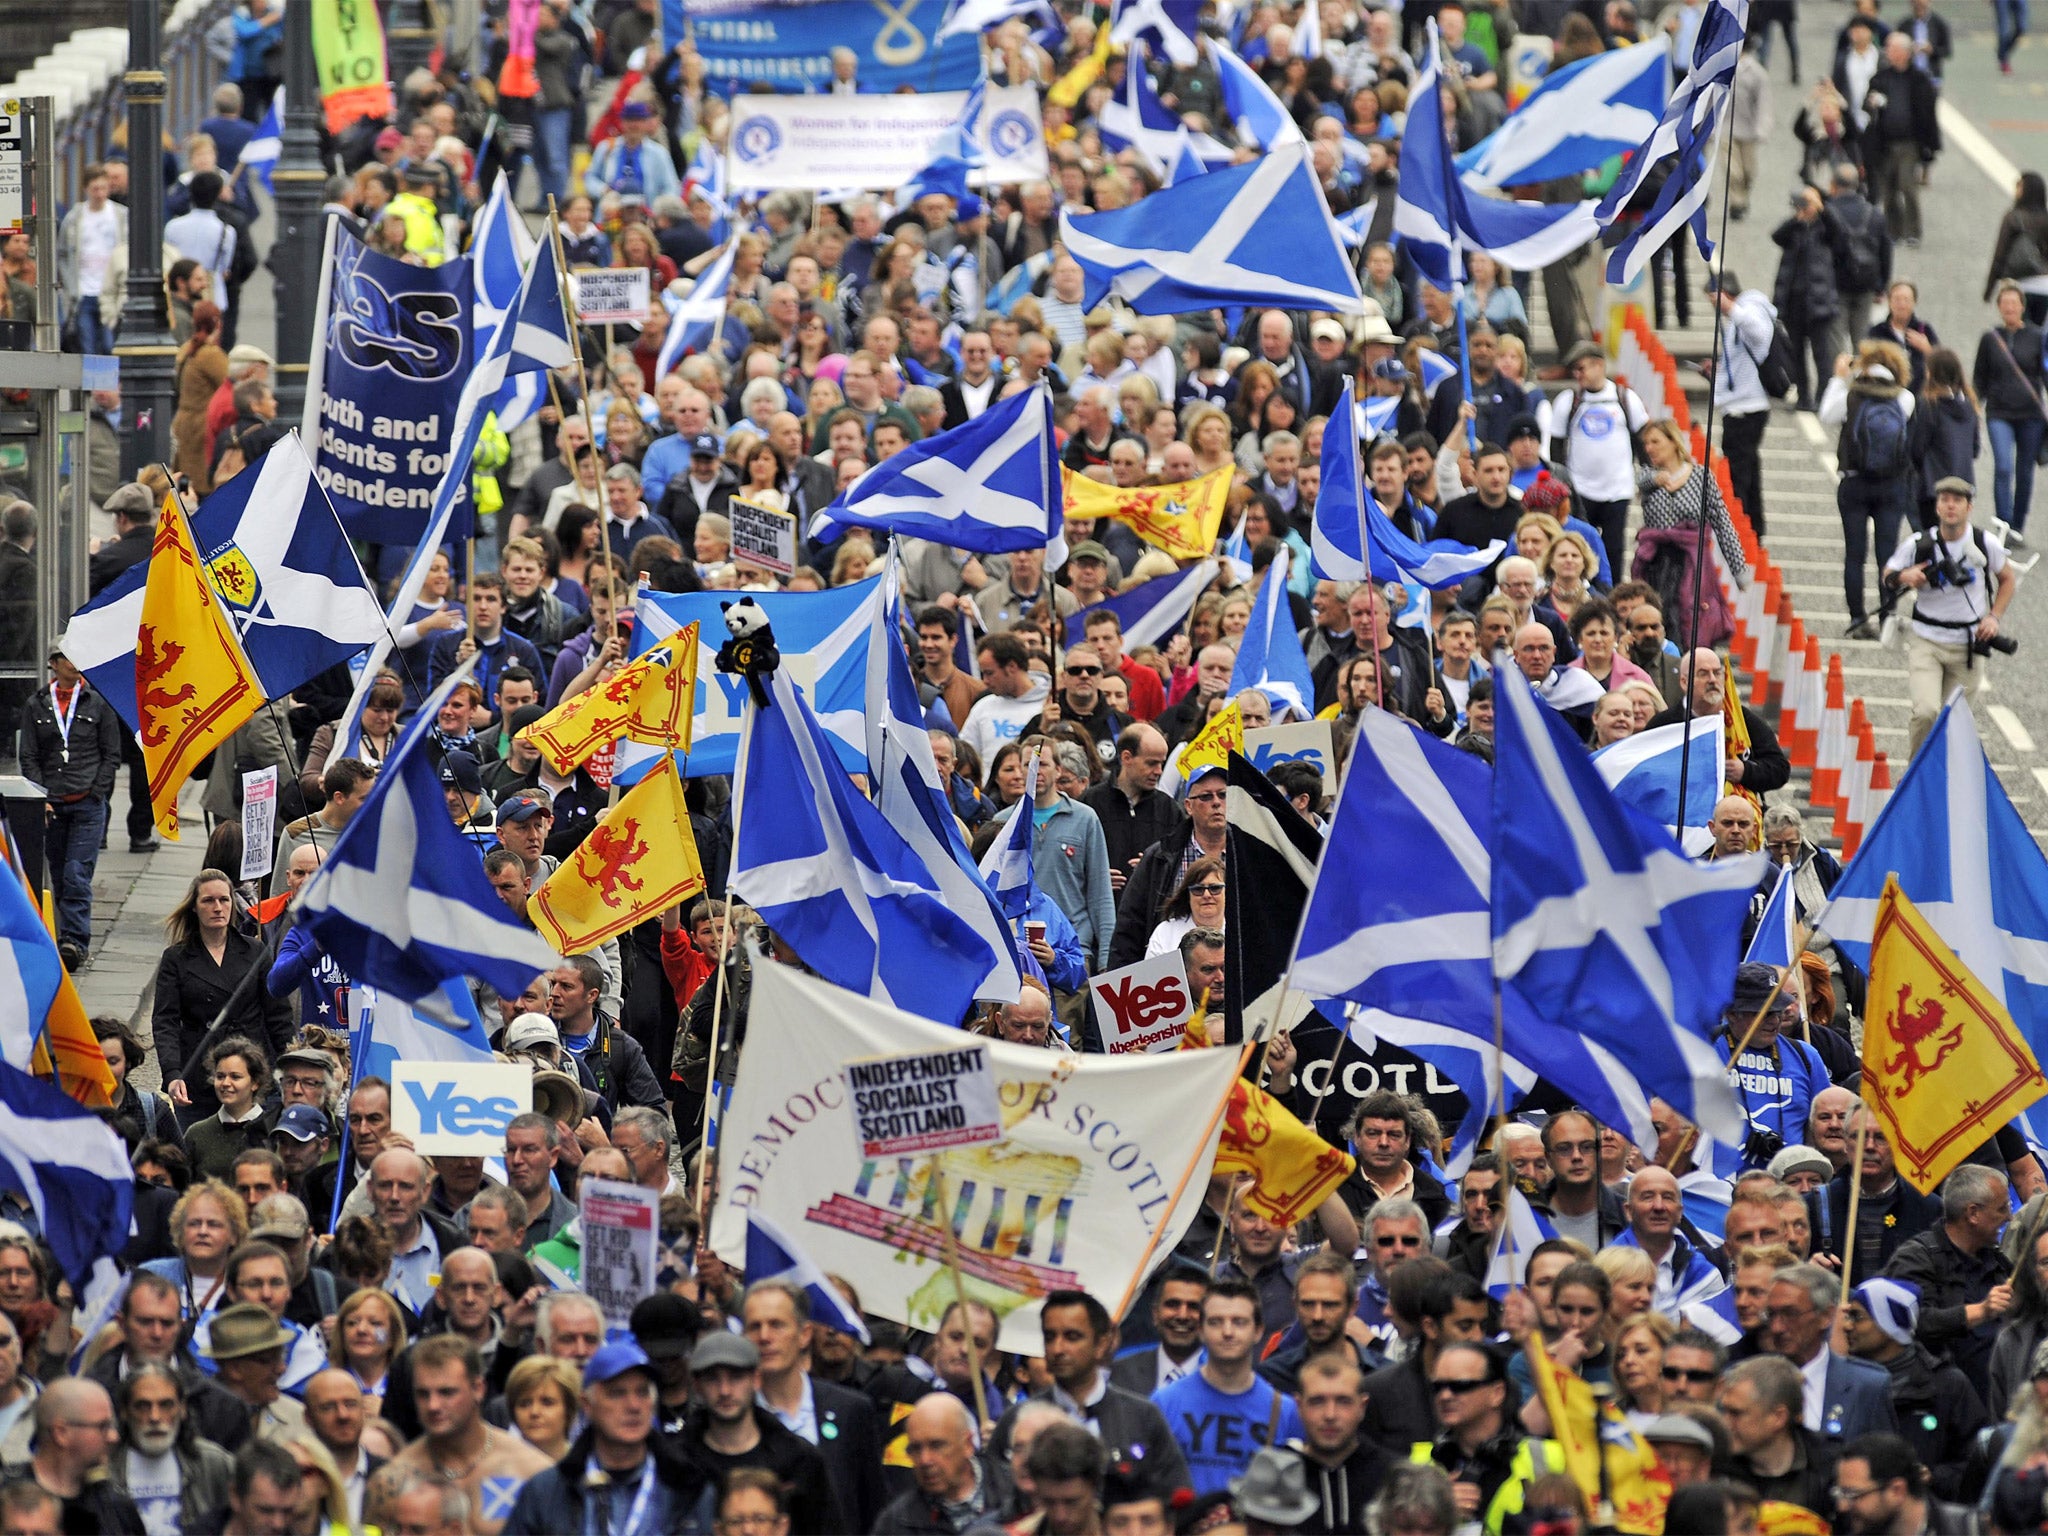 The Yes campaign has insisted that an independent Scotland would retain the pound